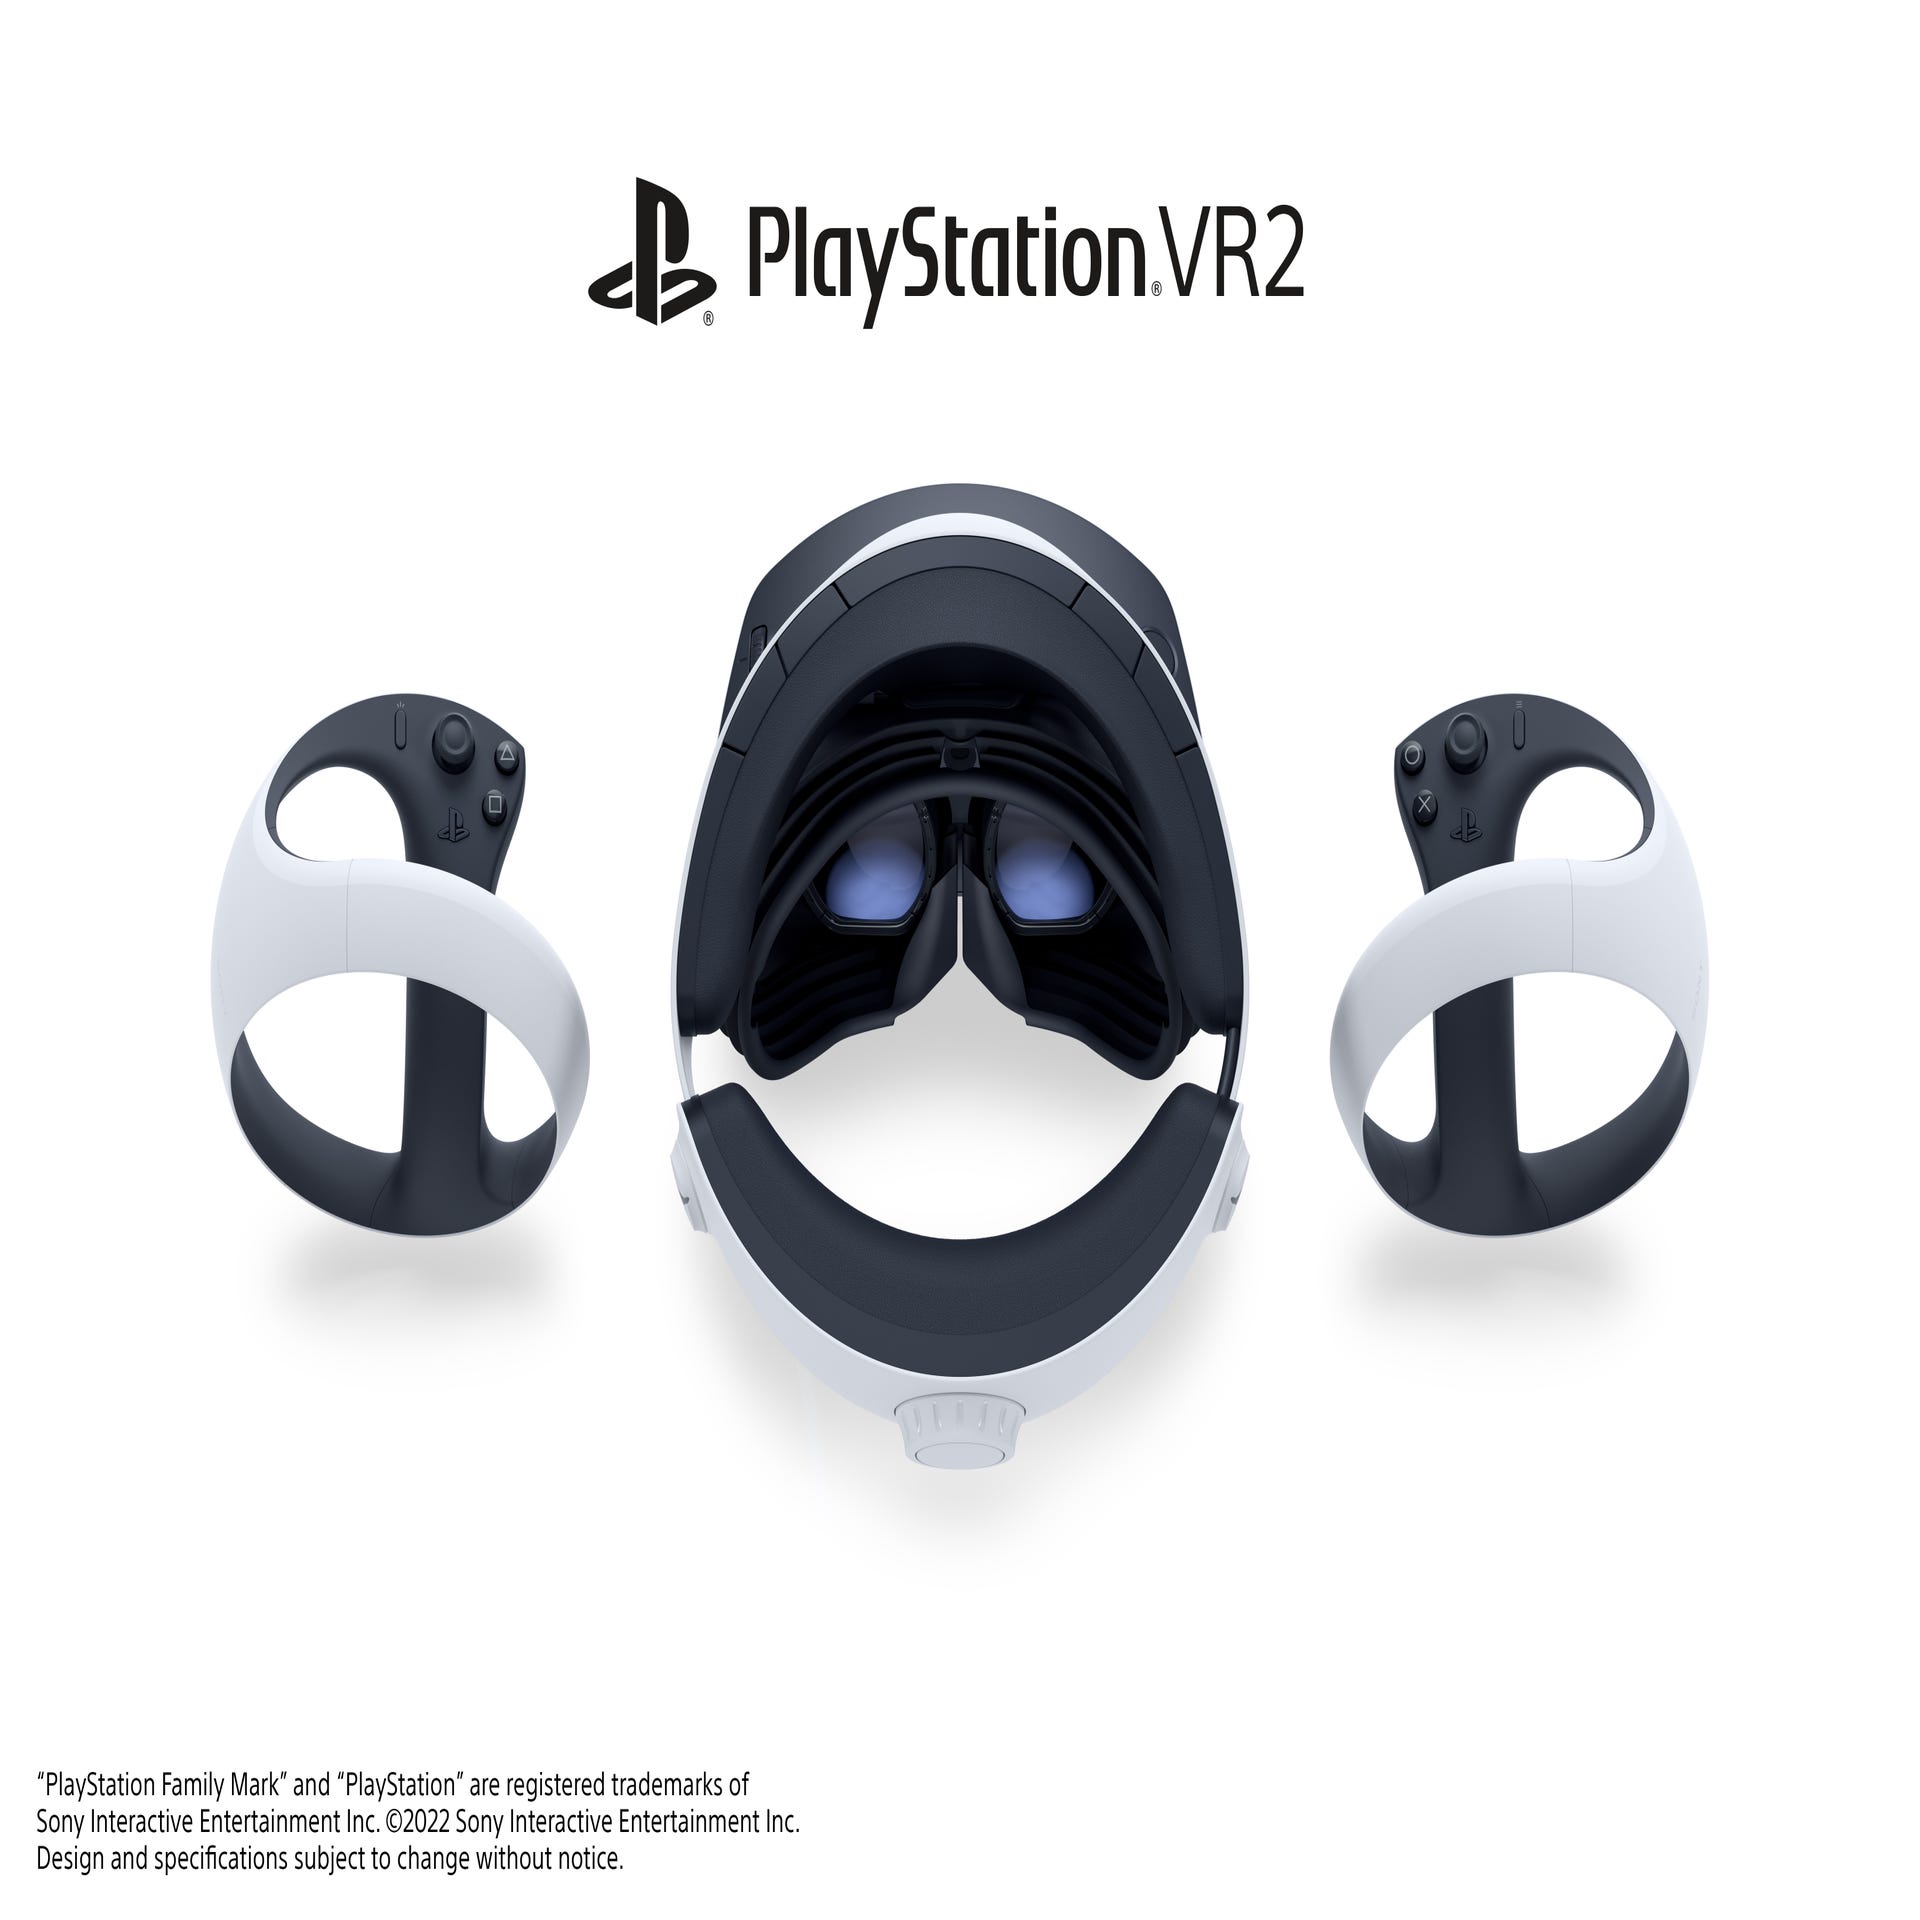 Sony PSVR 2 review: Worth the high price